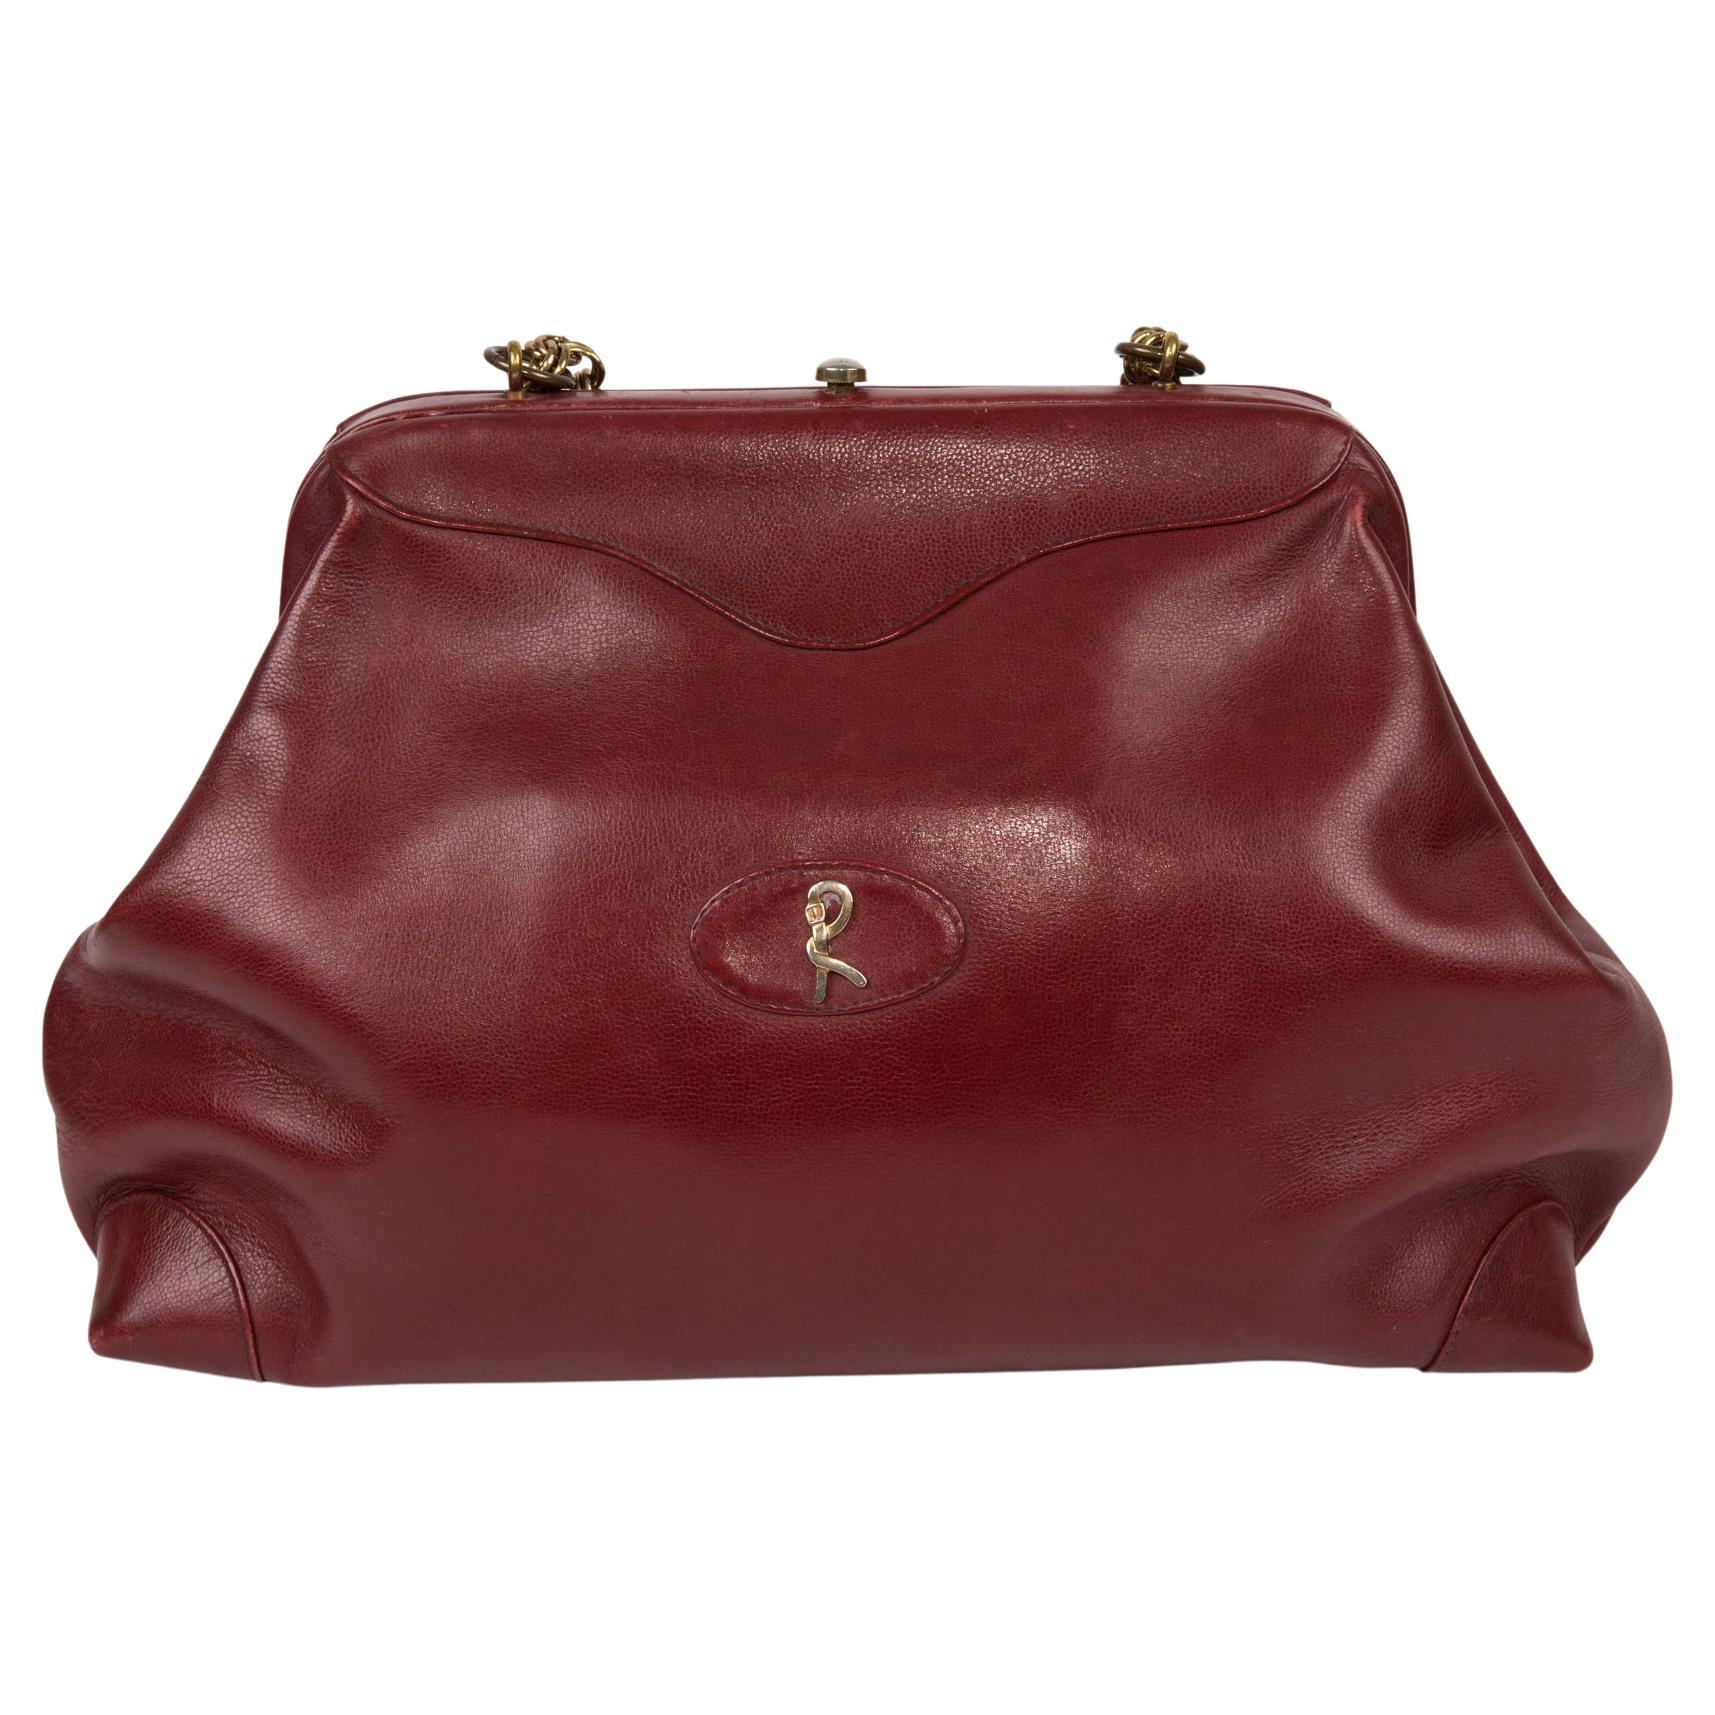 Roberta Di Camerino Bordeaux Leather Large Doctor Chain Bag For Sale